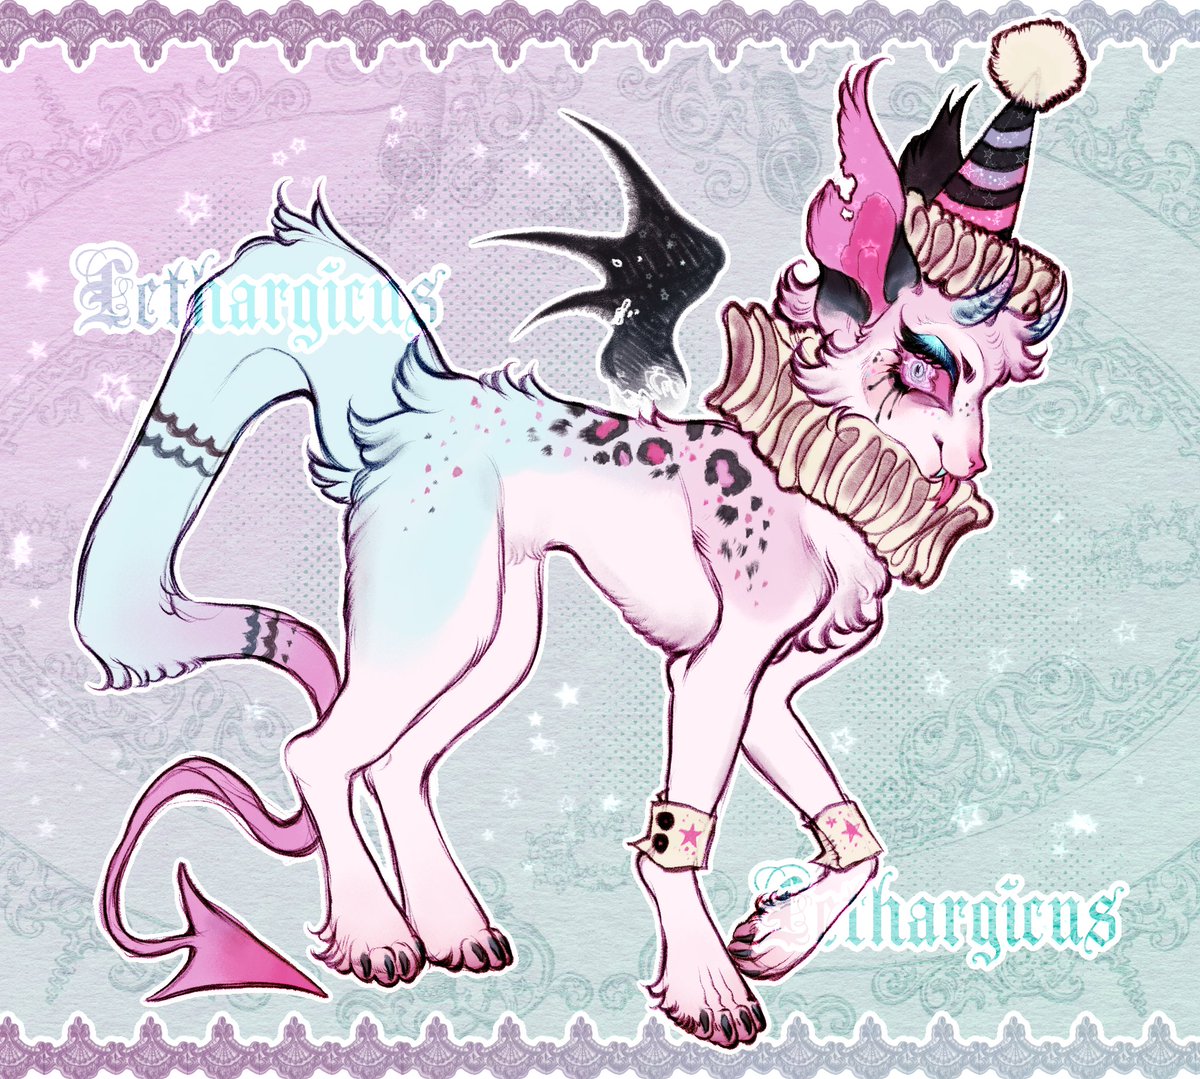 Pastel devil adopt!! Pprice - 60$ Comment to claim ^~^ Owner gets unwatermarked pic :D